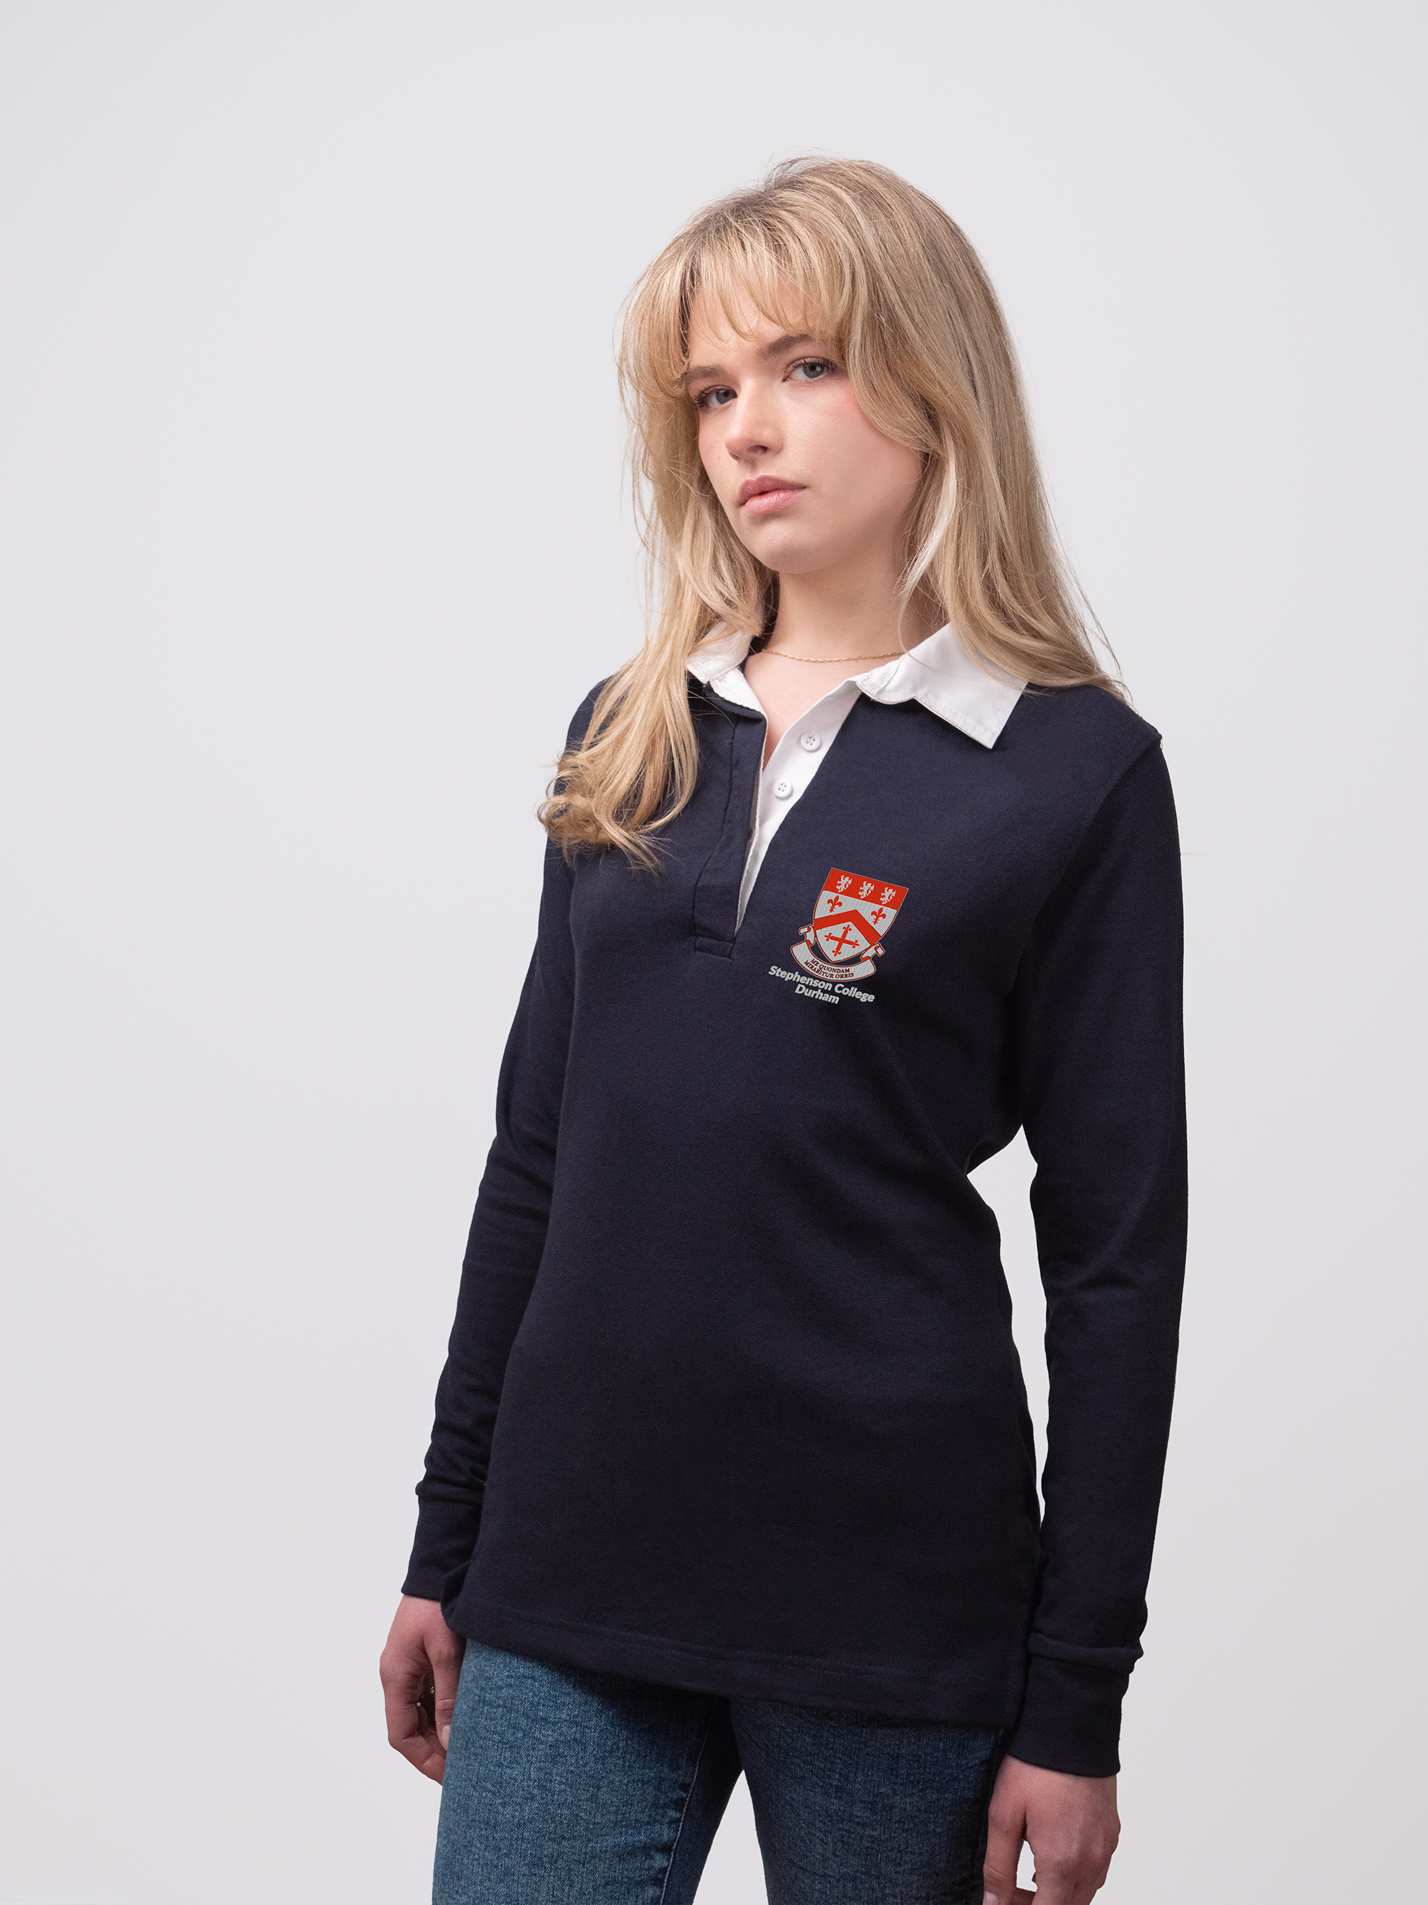 Student wearing a navy Stephenson College rugby shirt with embroidered crest